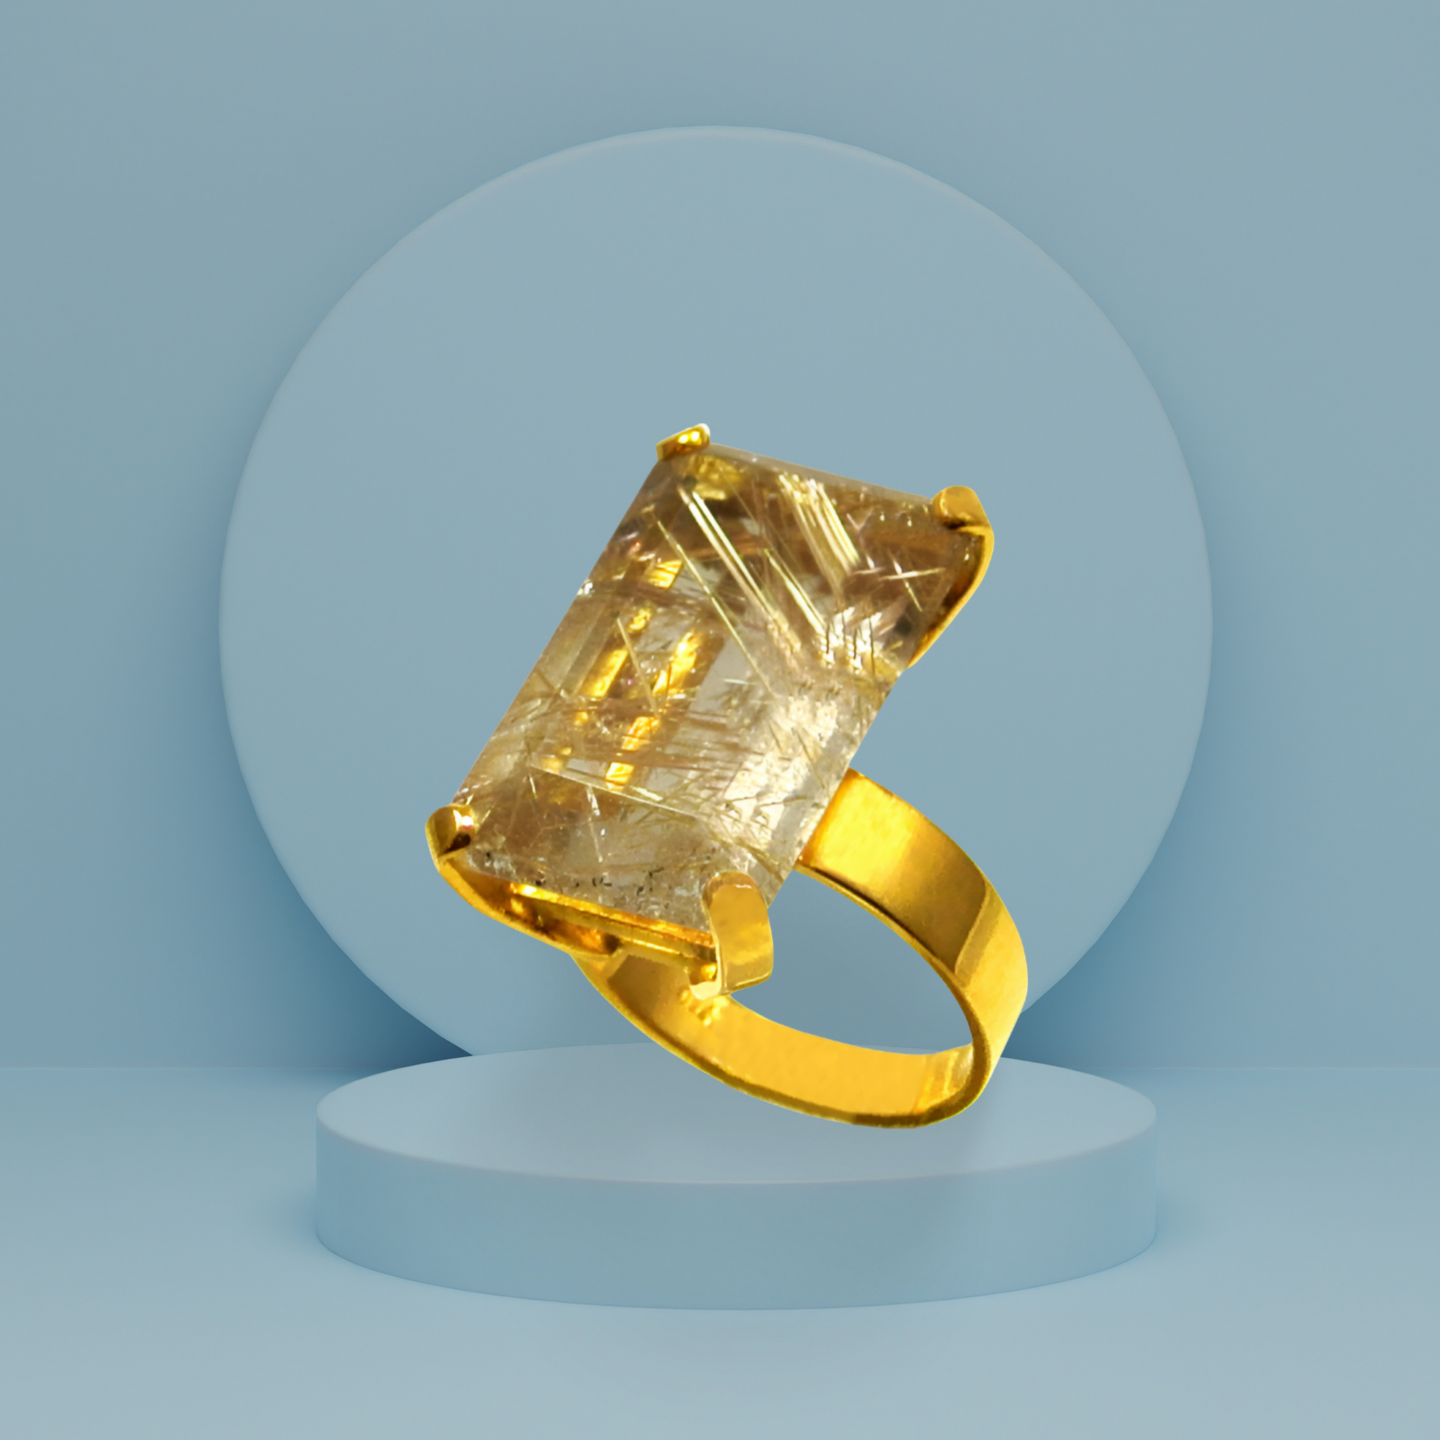 Ring in 18k Gold with a faceted rutile quartz stone (B-56)